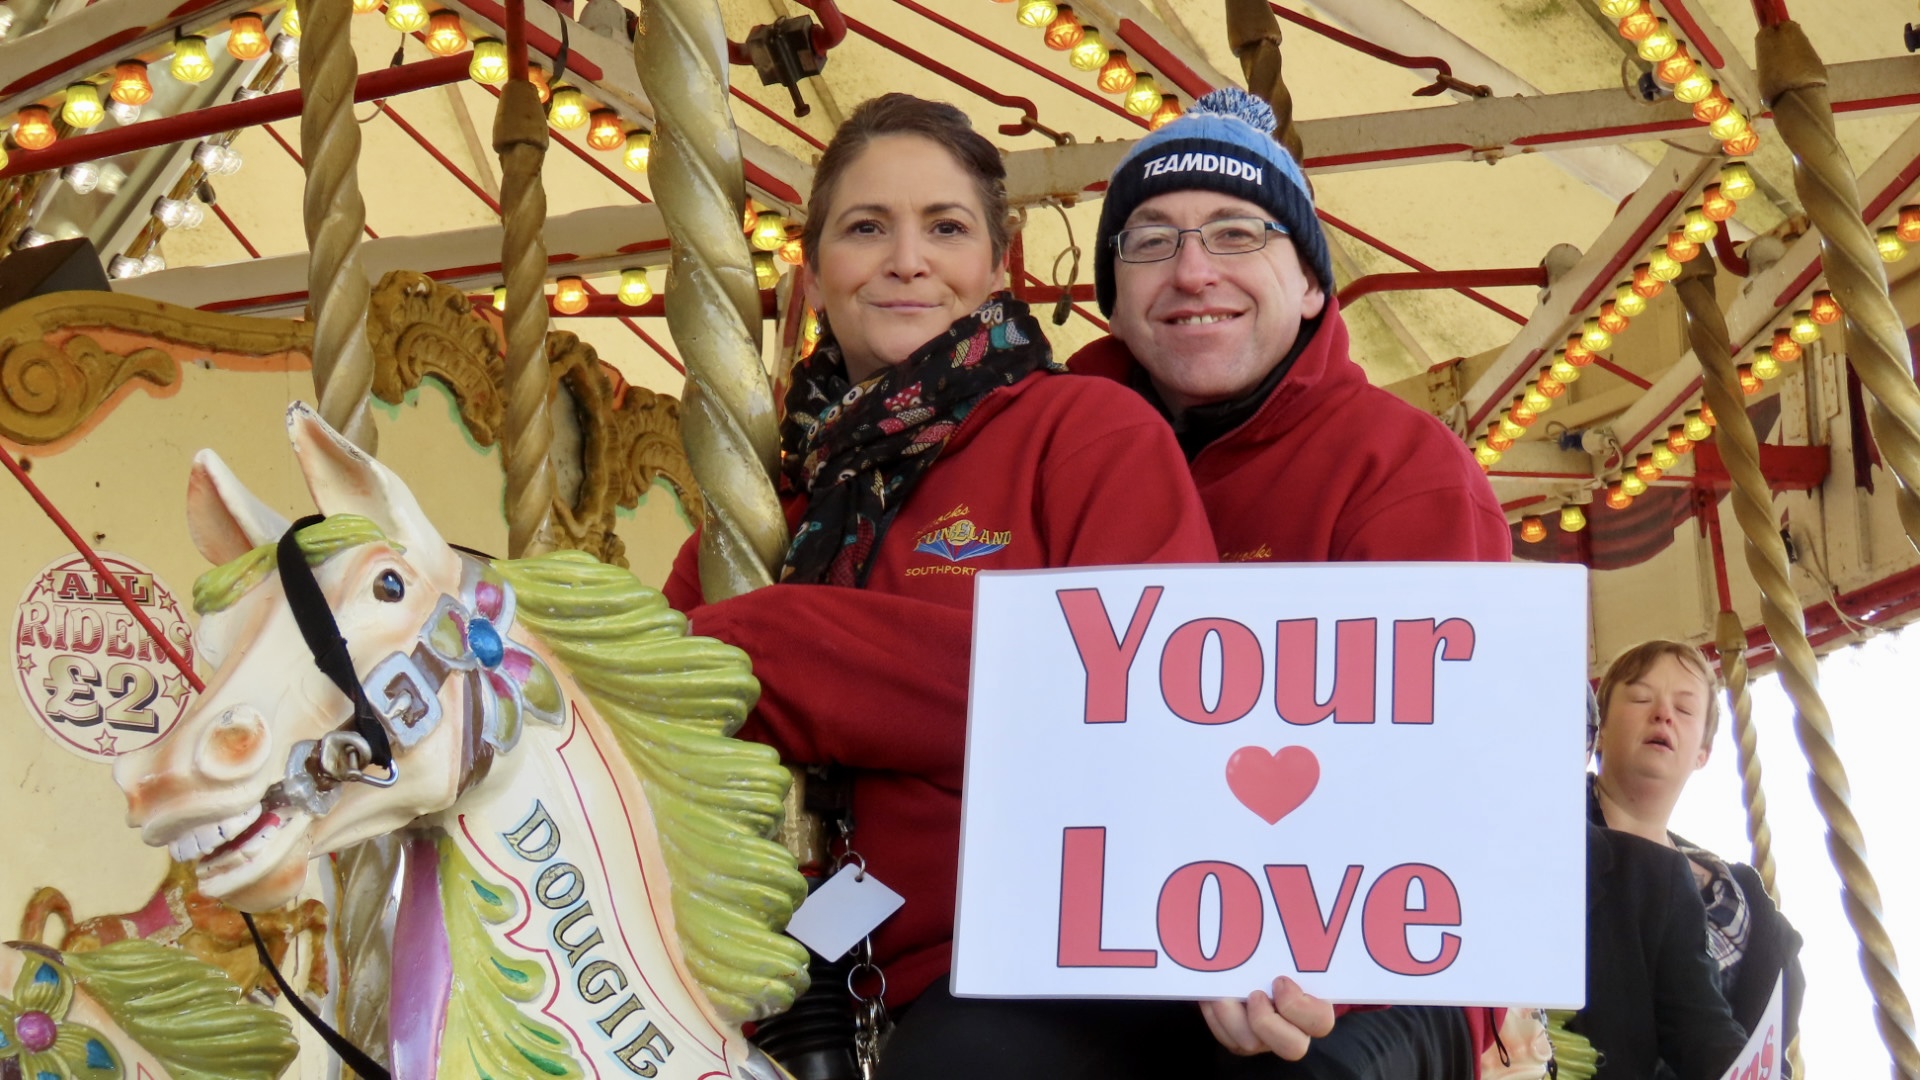 Silcocks Carousel is offering couples a two for one offer on Valentines Day. Photo by Andrew Brown Media